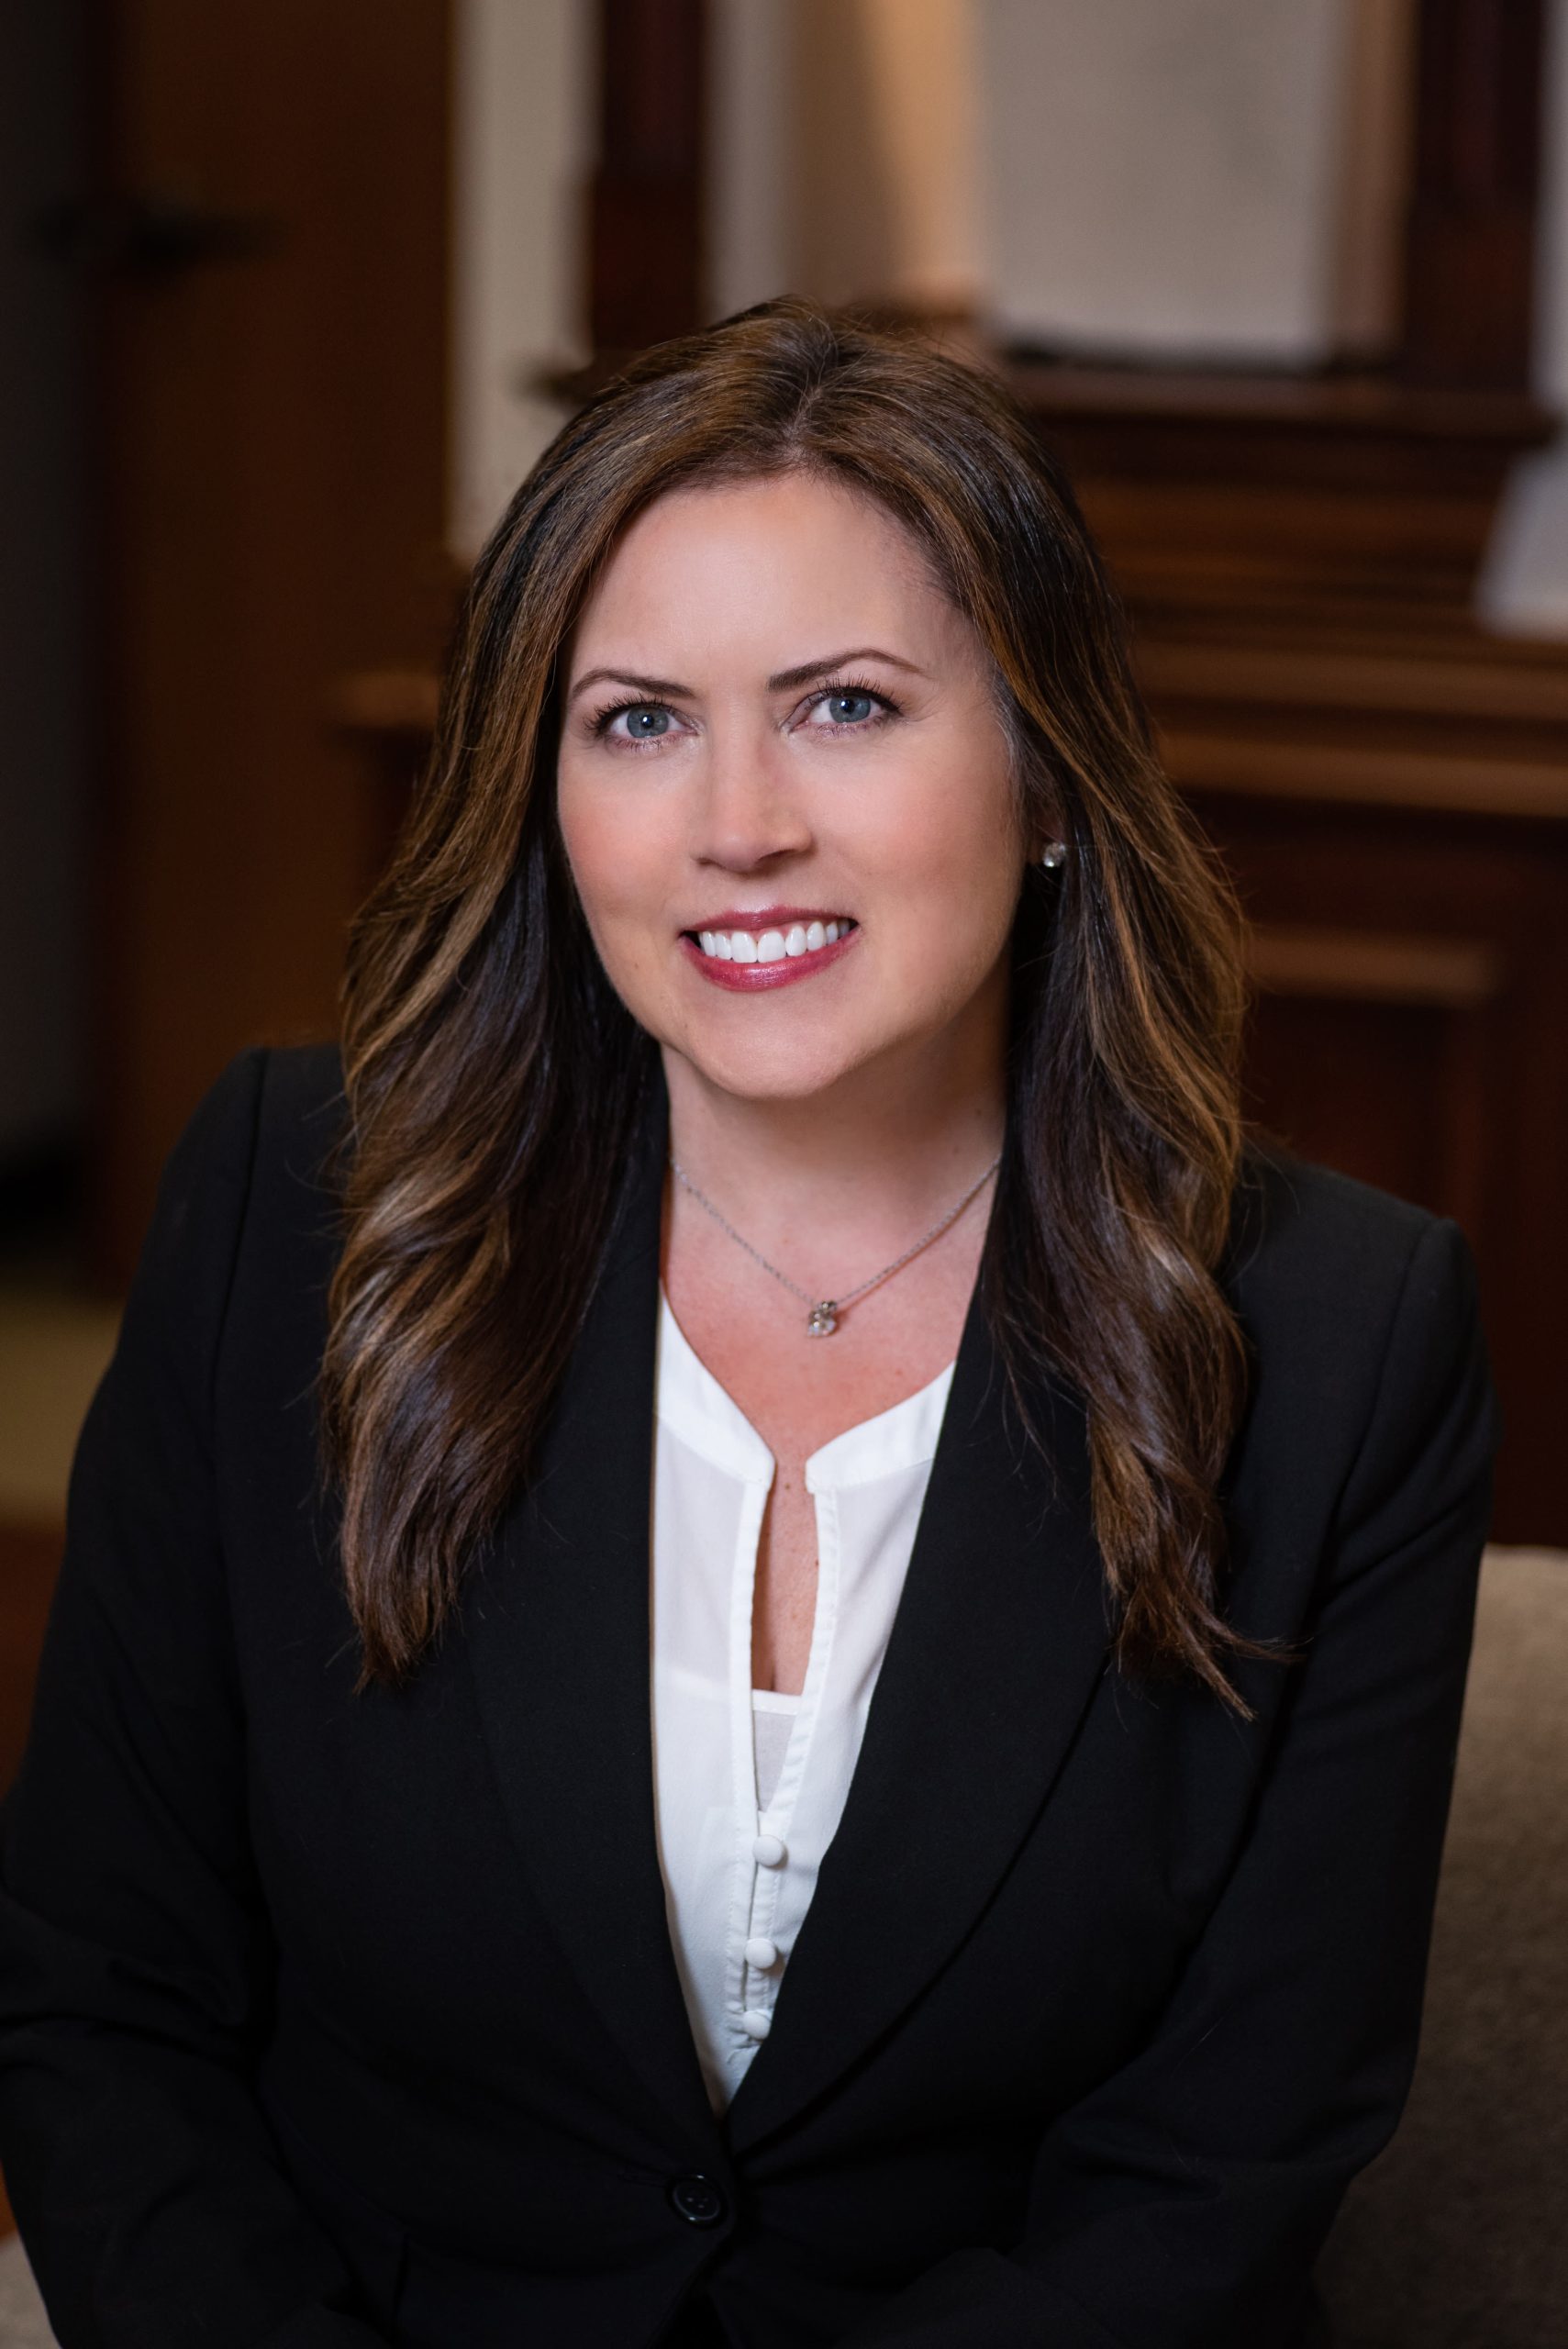 featured article WFG NATIONAL TITLE INSURANCE COMPANY PROMOTES SUZANNE TINSLEY TO SVP FOR THE COMPANY’S SOUTHWEST, ROCKY MOUNTAIN AND WESTERN REGIONS